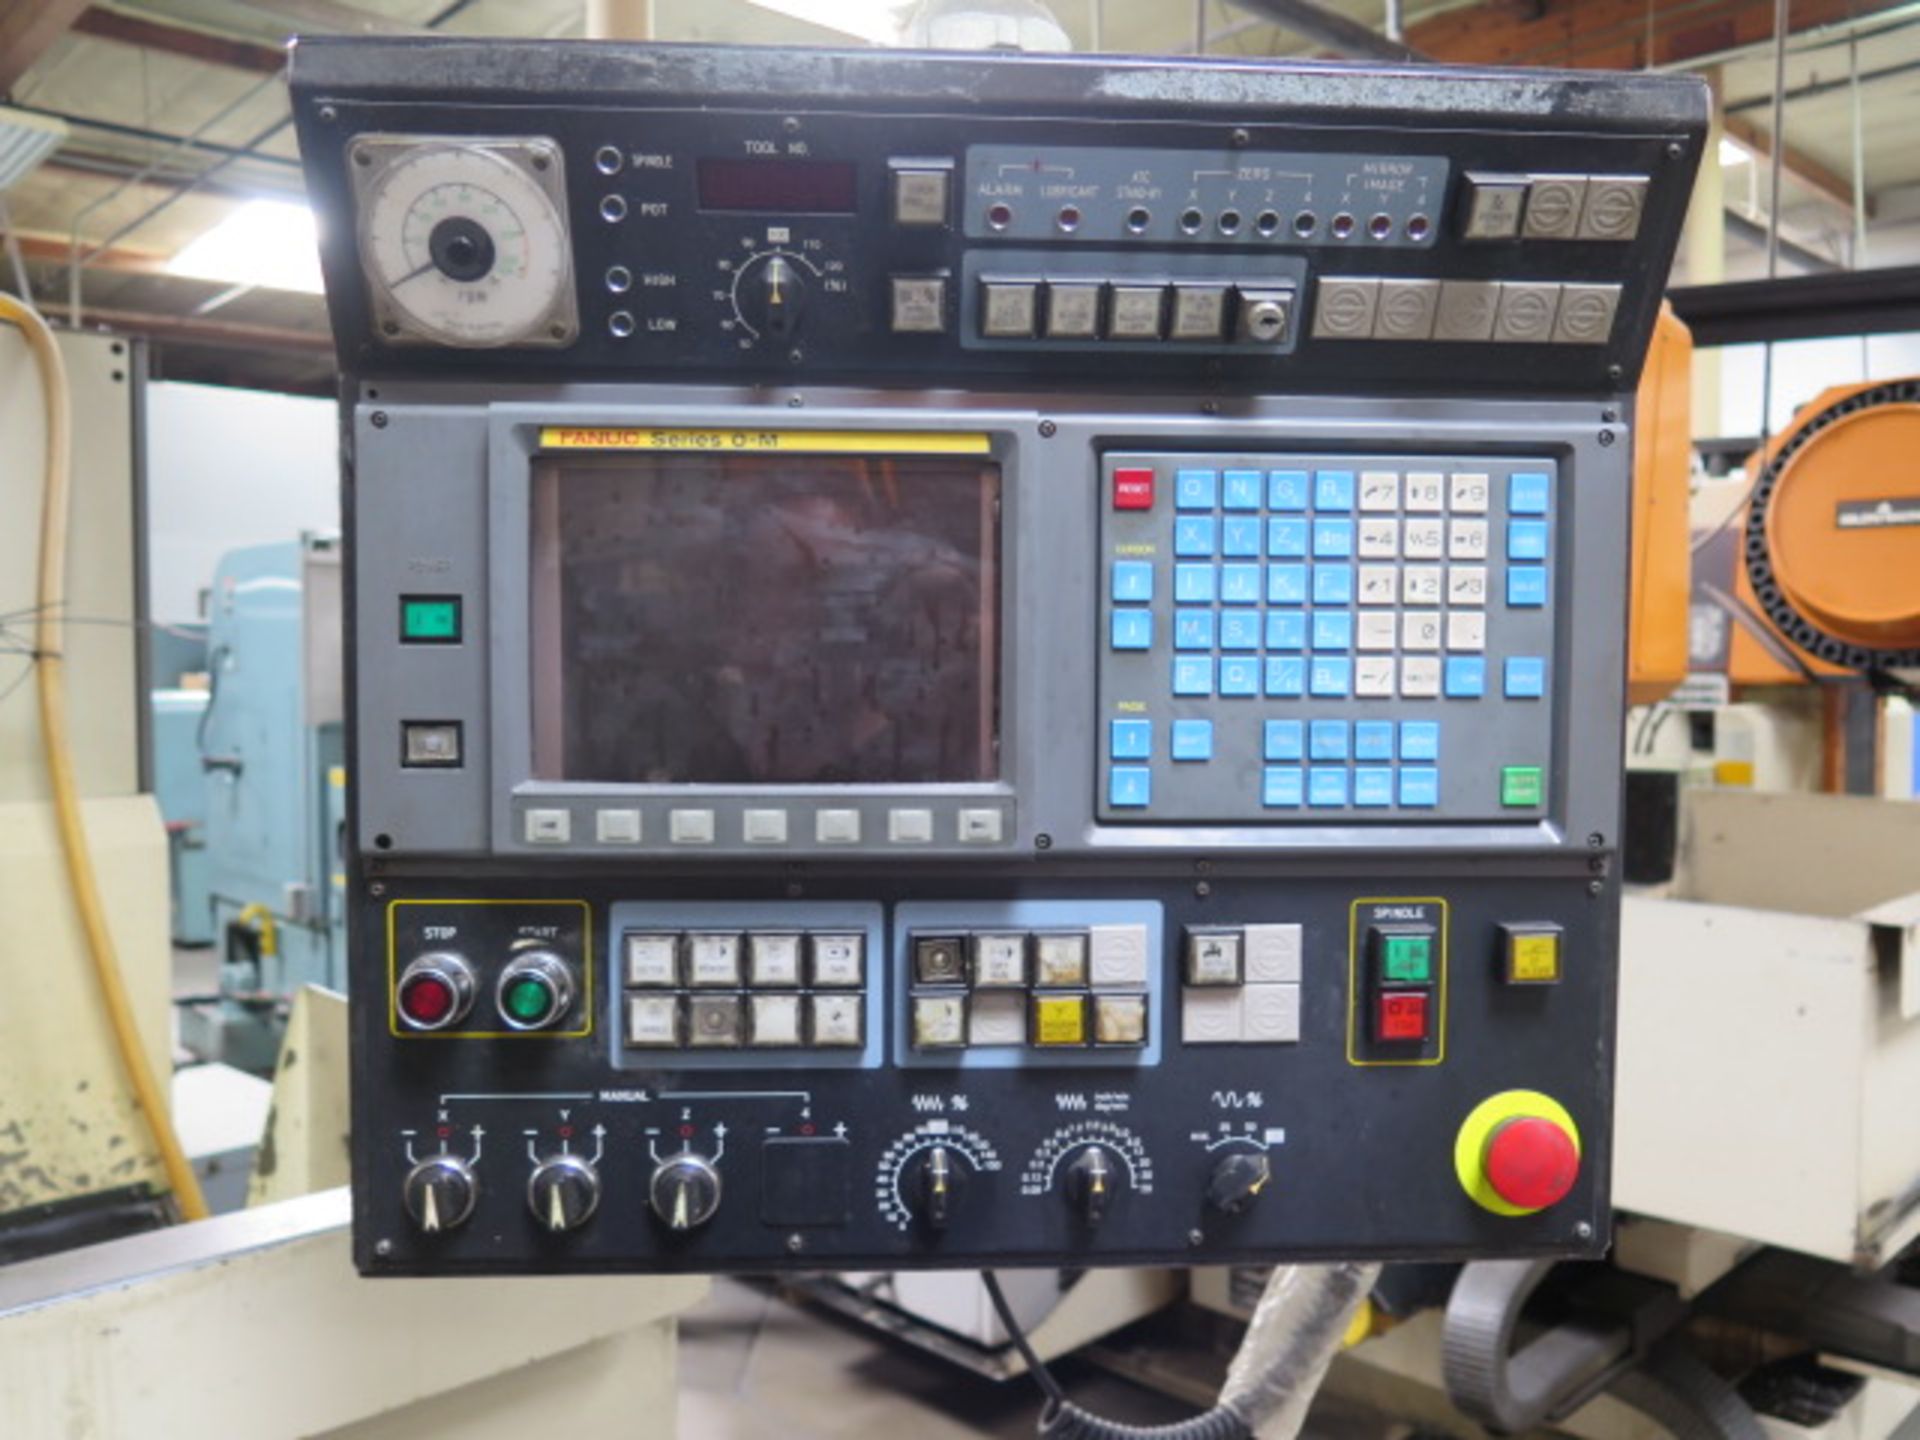 LeBlond Makino FNC-74/A30 CNC VMC s/n LM2-169 w/ GE Fanuc 0M Controls, SOLD AS IS - Image 9 of 13